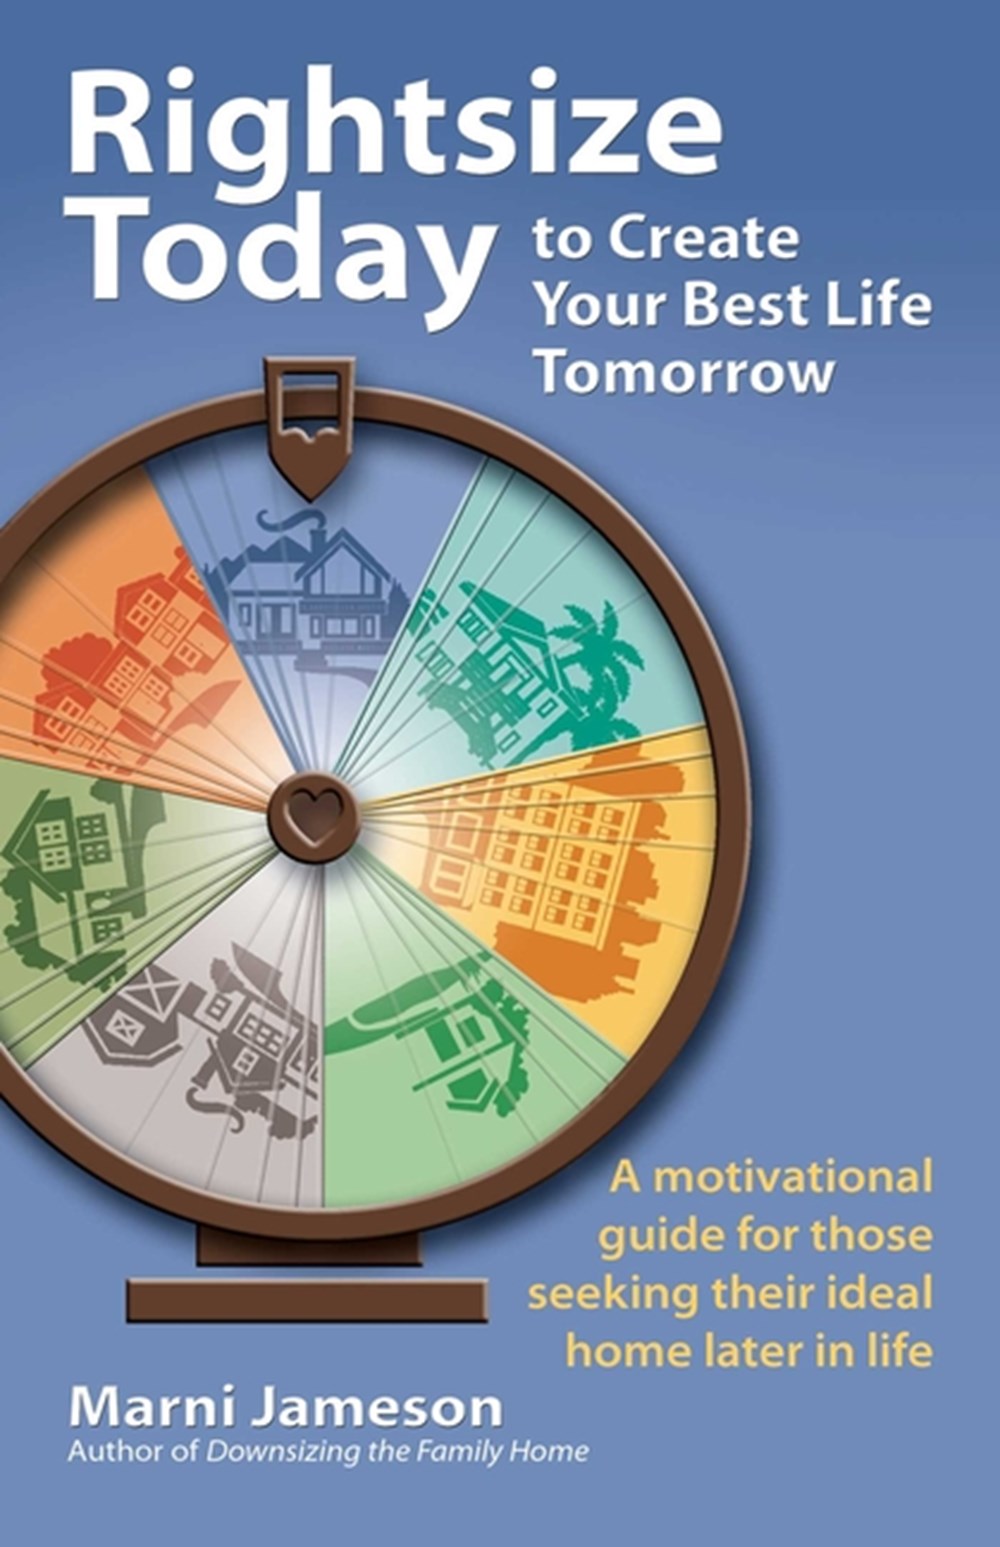 Rightsize Today to Create Your Best Life Tomorrow: A Motivational Guide for Those Seeking Their Idea